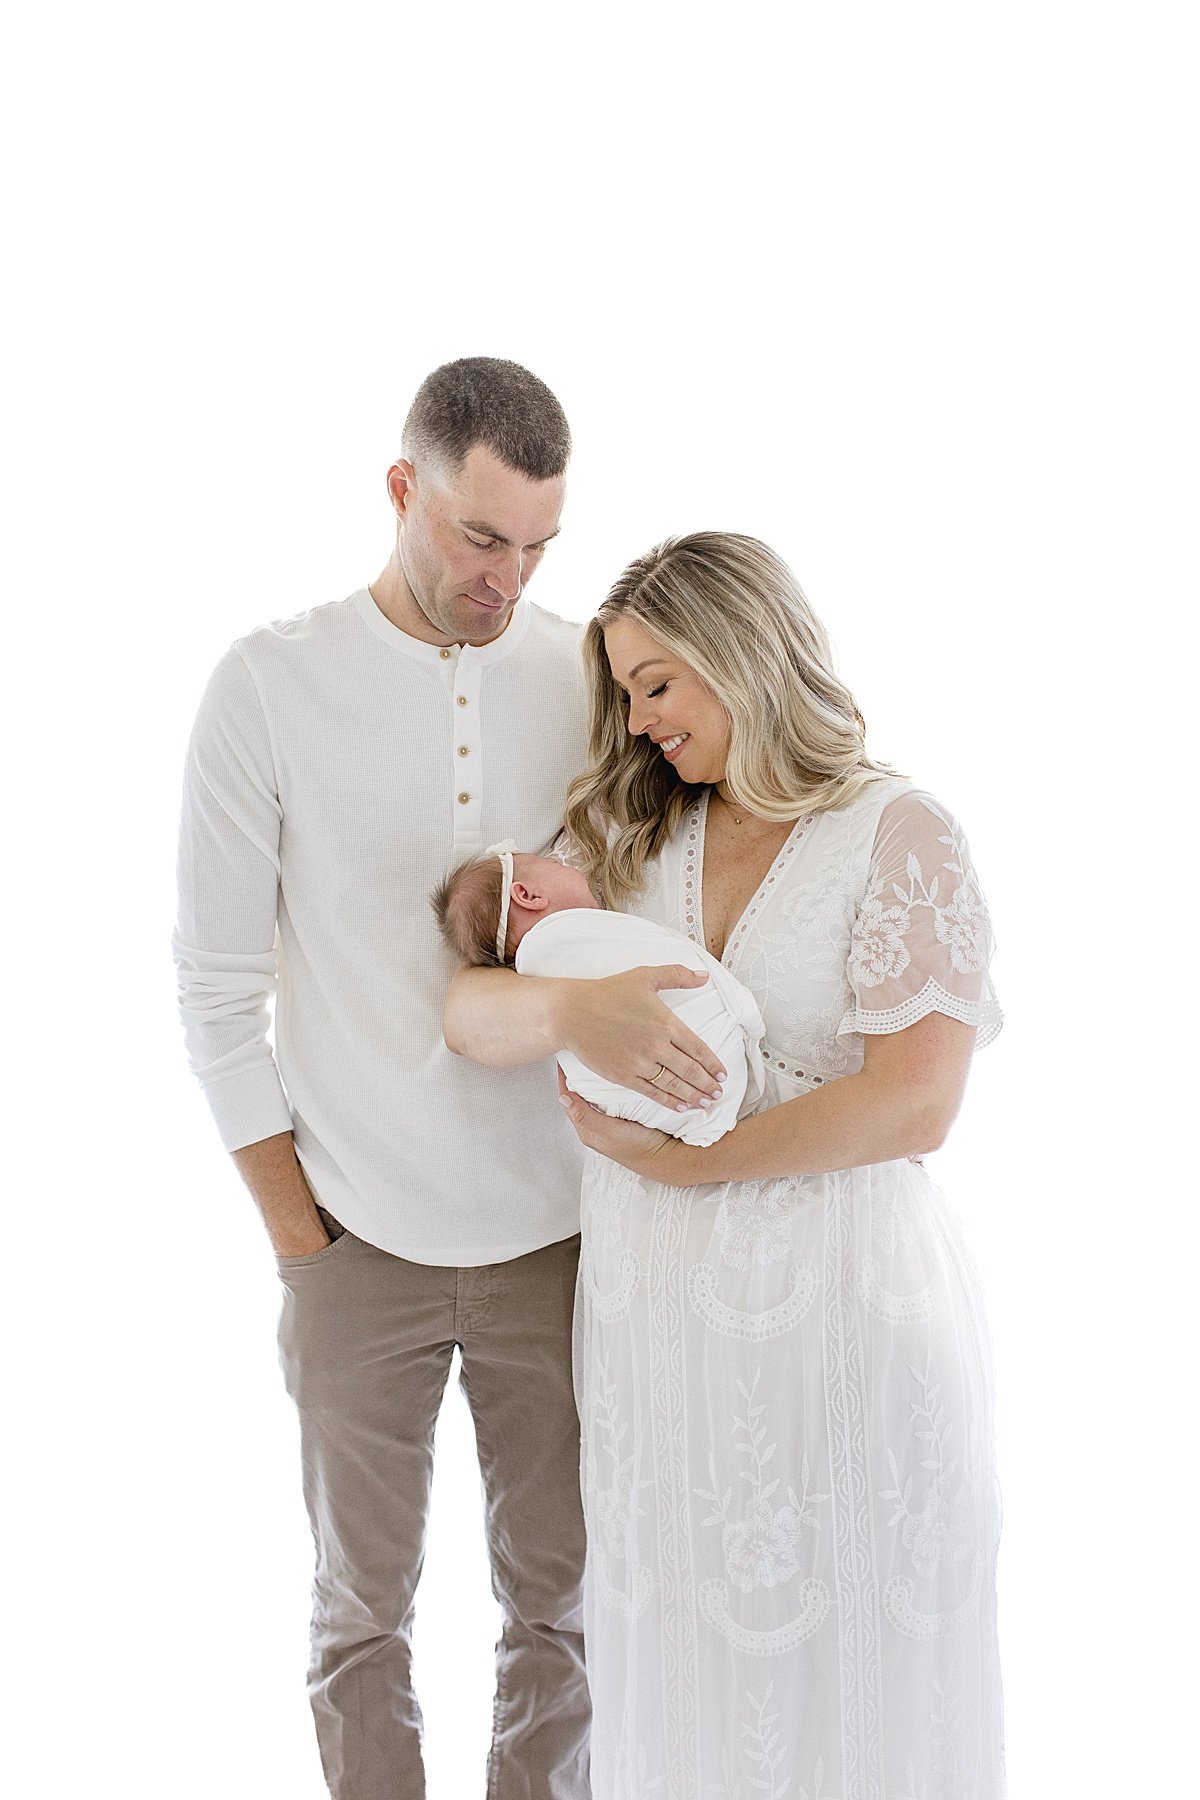 happy new parents smiling at their baby daughter | Newport Beach Photographer Ambre Williams